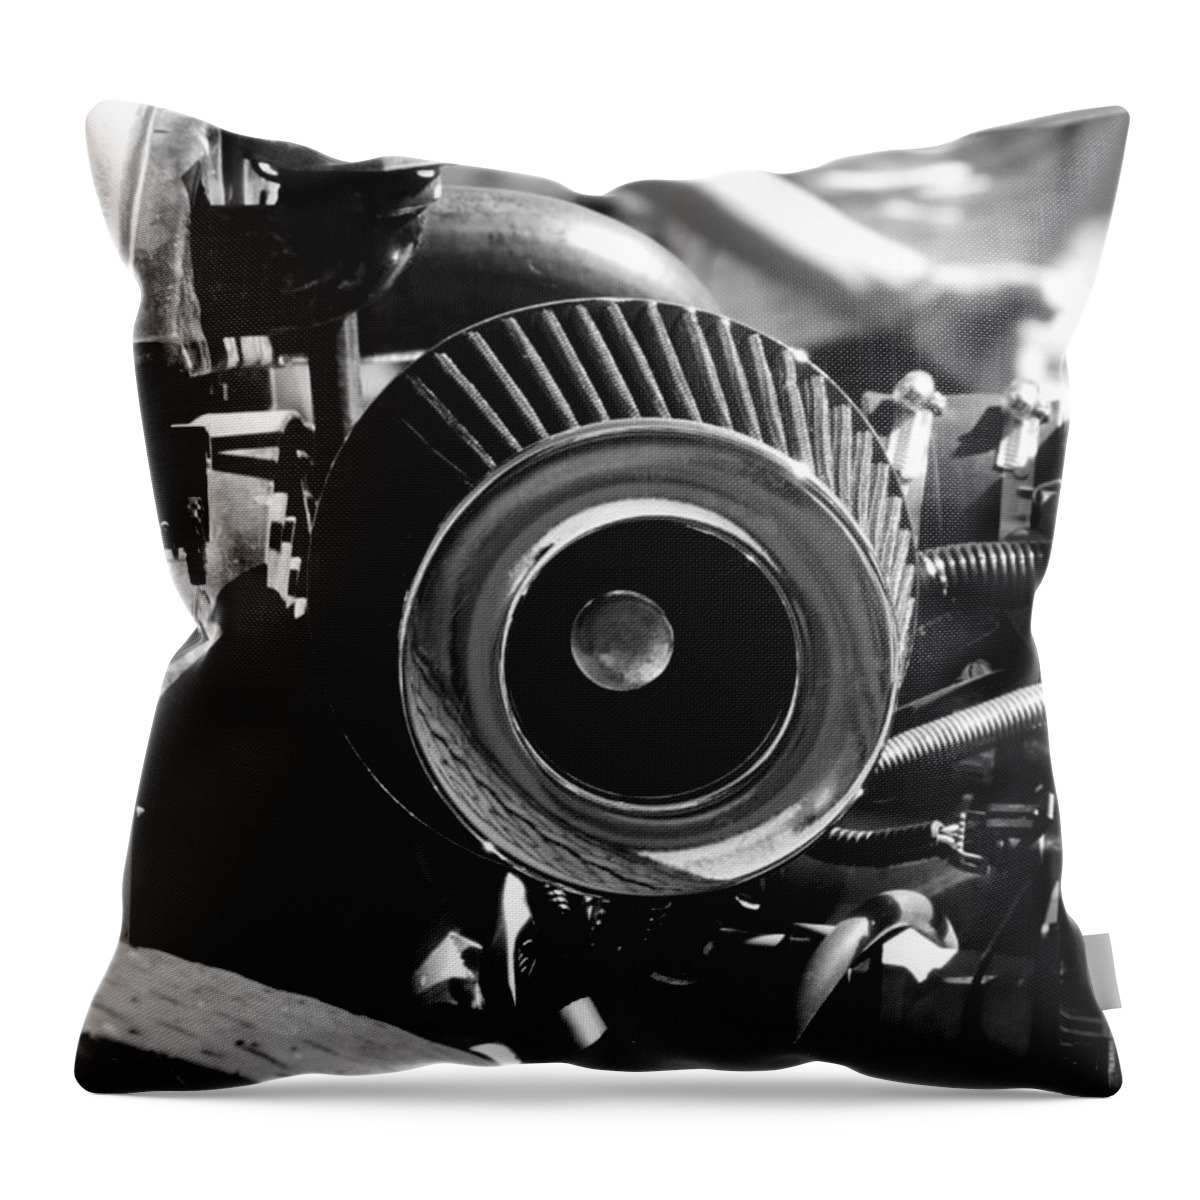 Hot Rod Abstract In Black And White Throw Pillow featuring the photograph Hot Rod Abstract in Black and White by Bill Tomsa